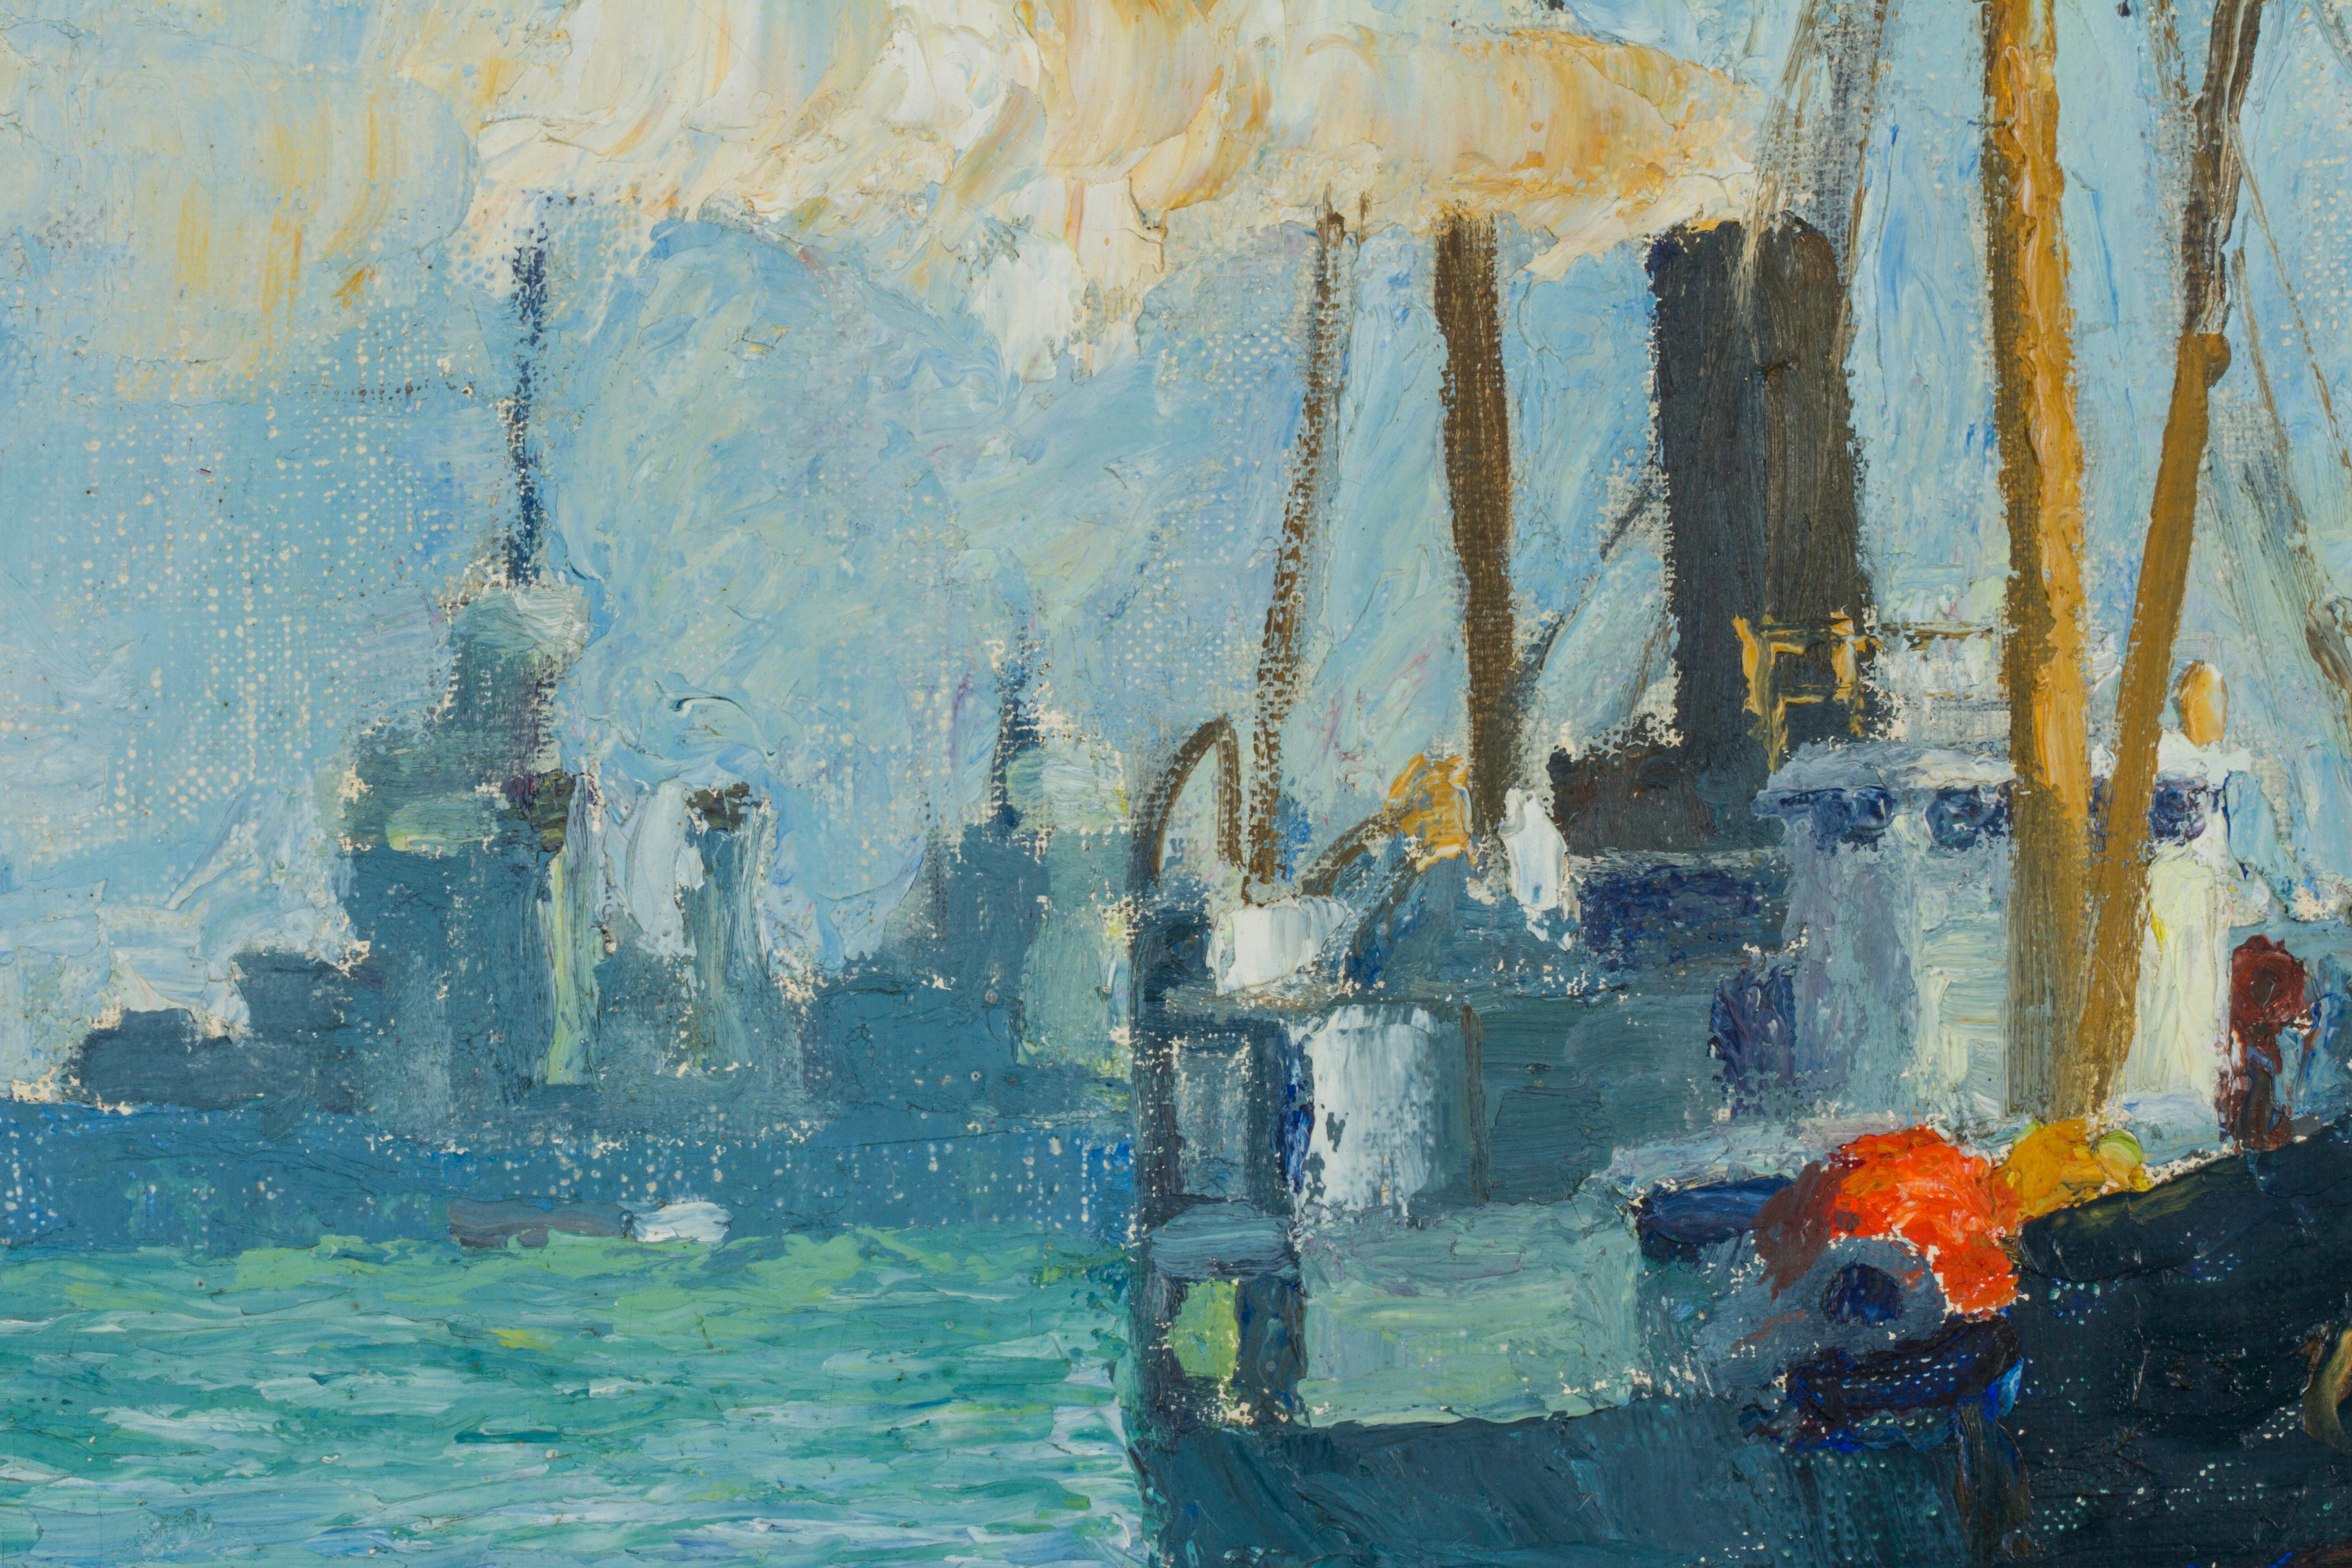 Canvas Painting by Louis Krupp “Harbor Ships” For Sale